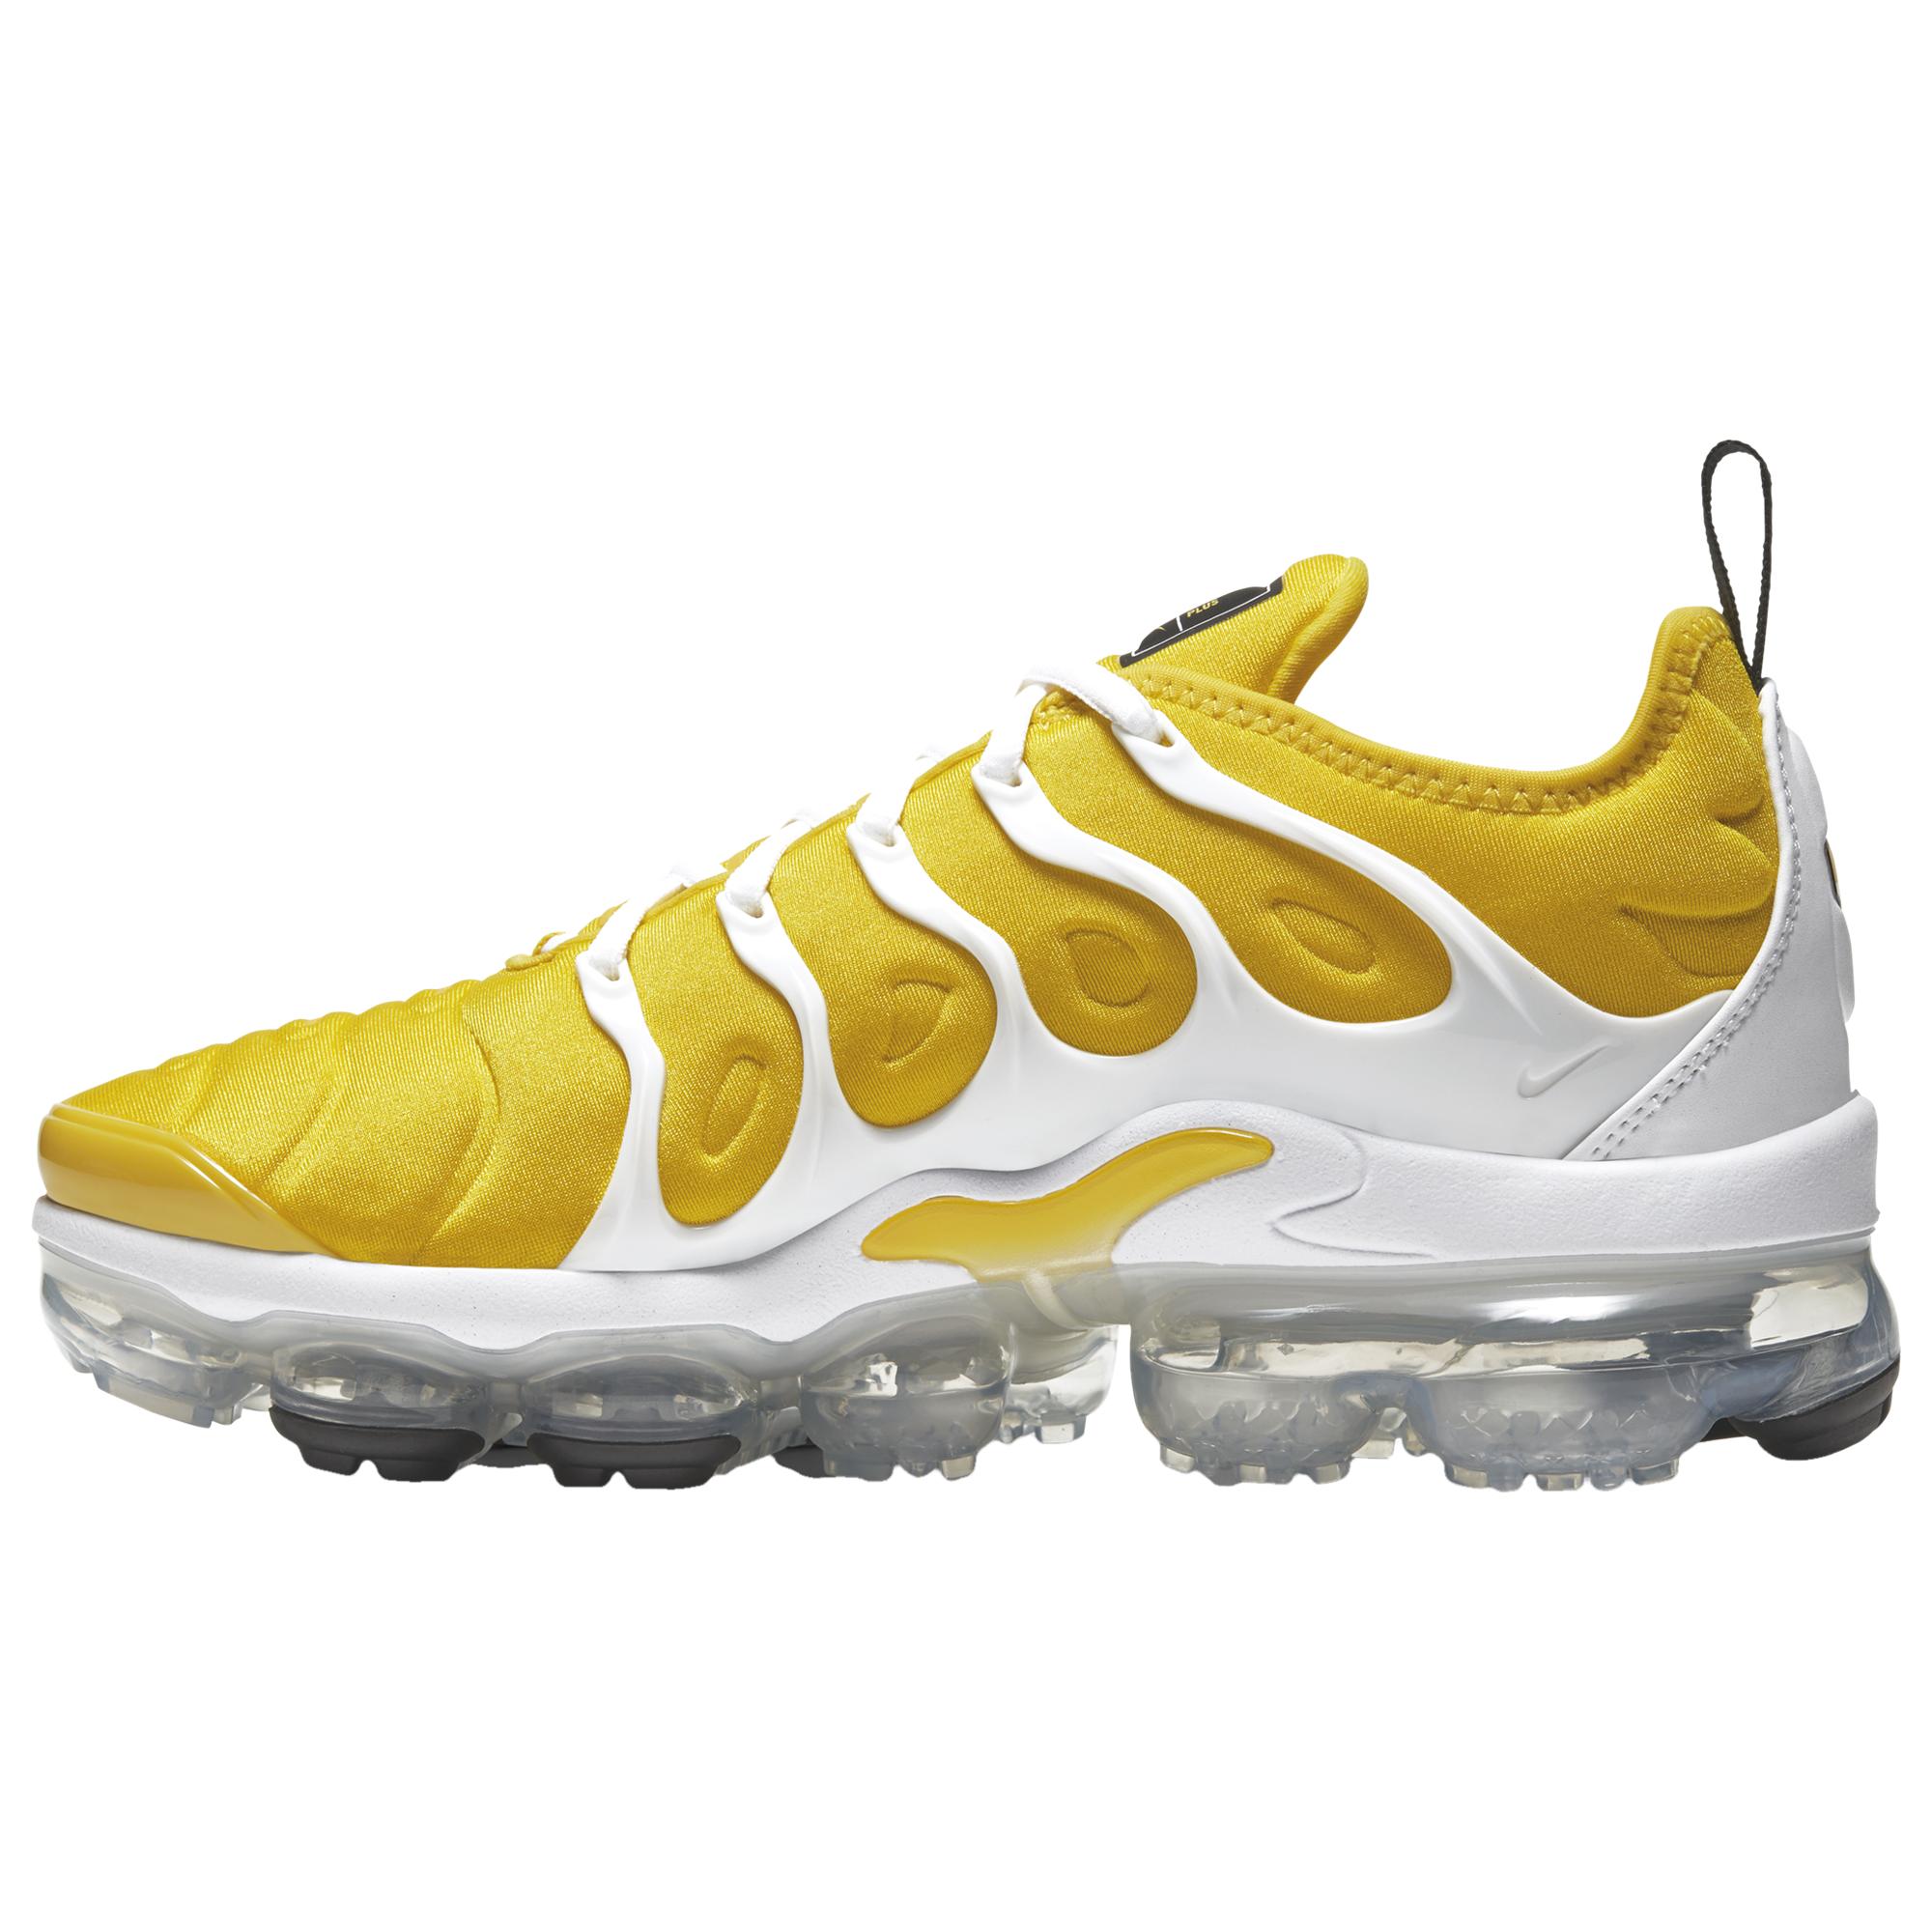 Nike Synthetic Air Vapormax Plus Running Shoes in Yellow - Save 30% - Lyst